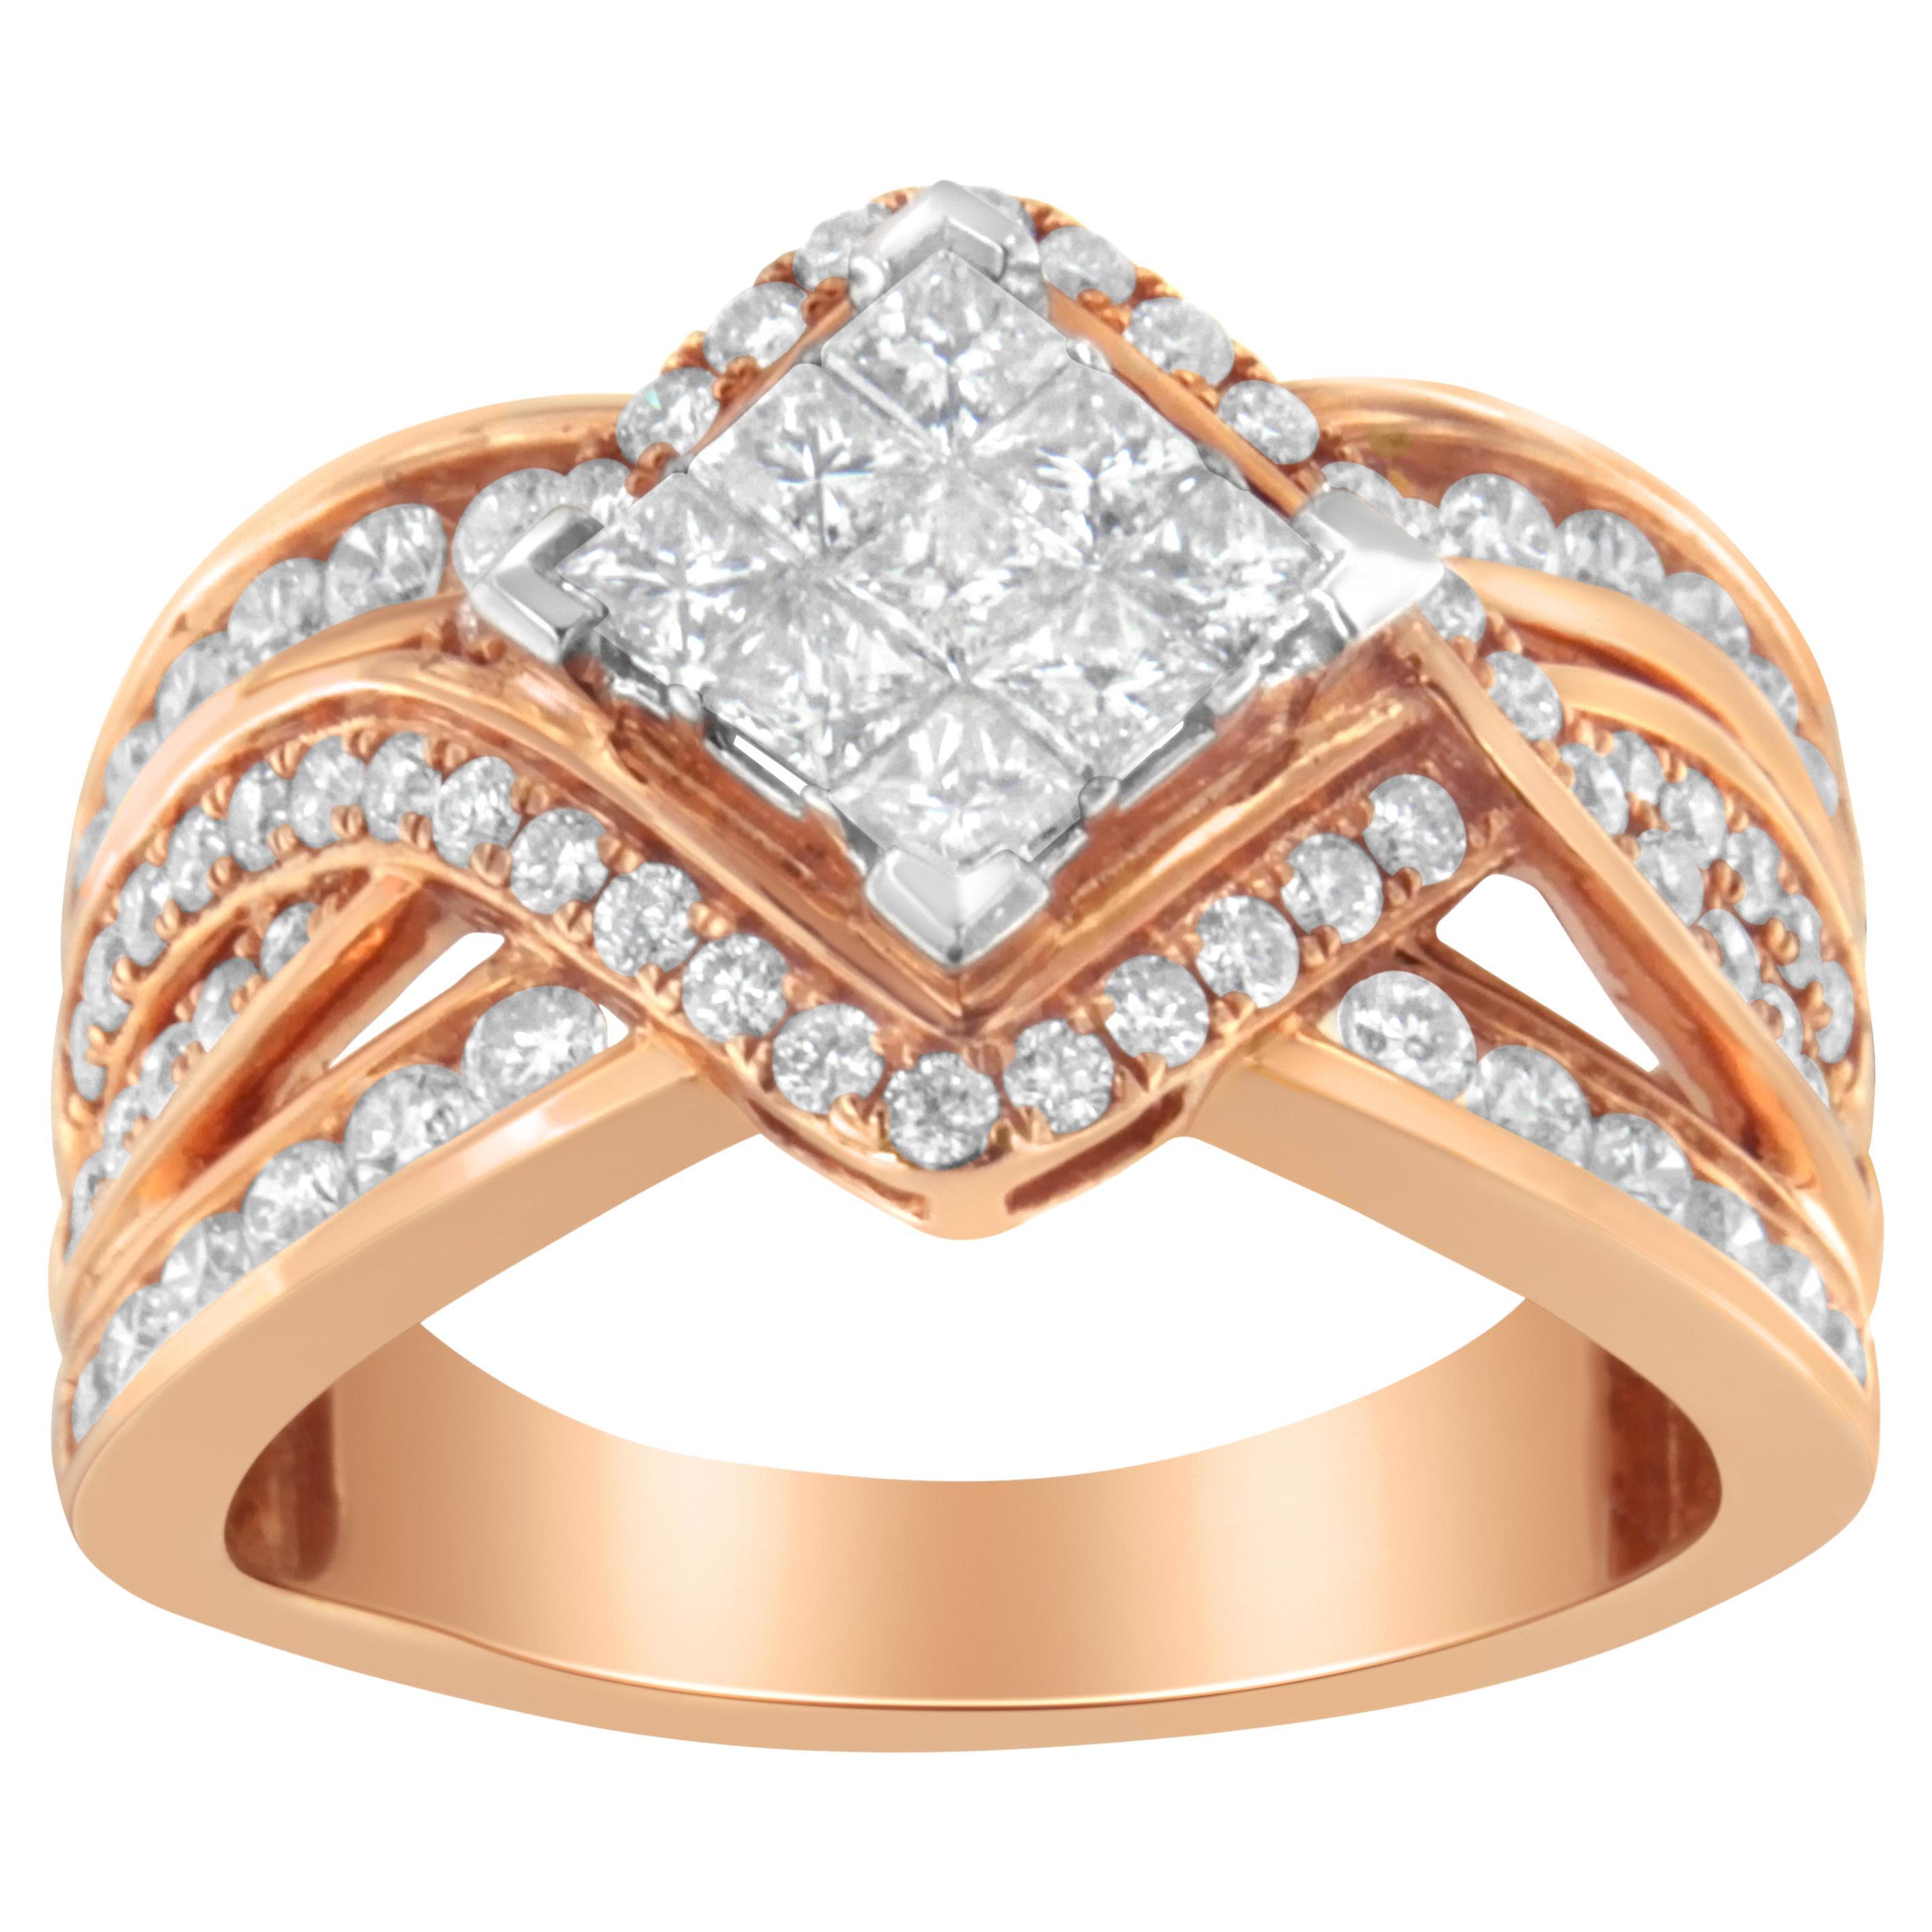 Two-Tone 10K Gold 1 1/2 Carat Diamond Bypass Cocktail Ring For Sale